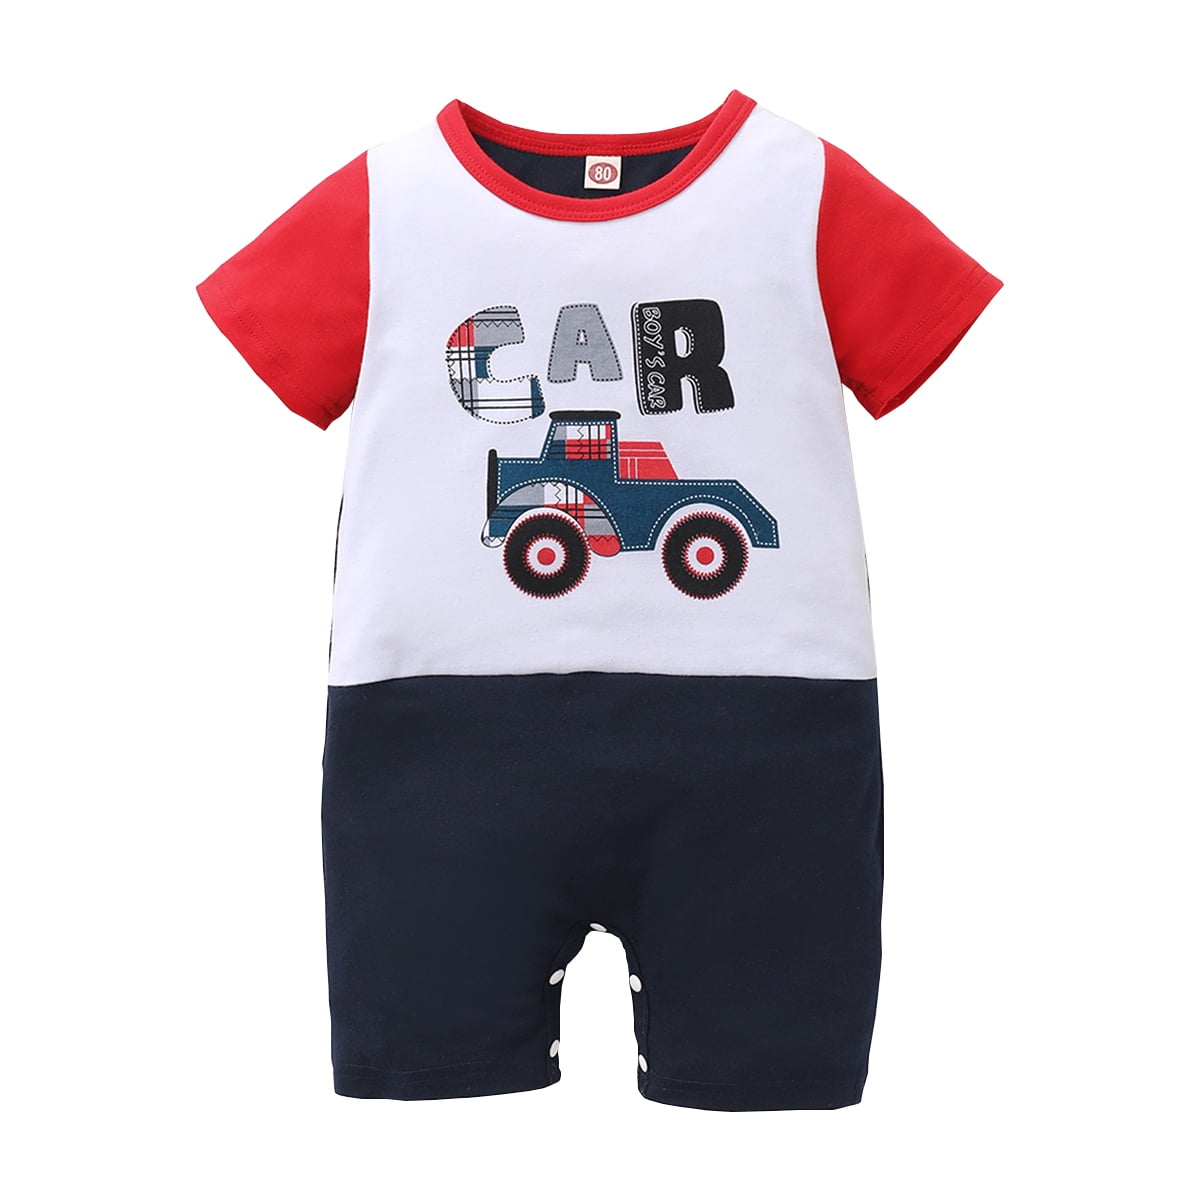 Toddler Baby Boy Clothes Baby Boy Outfits For 12-18 Months Boys Short ...